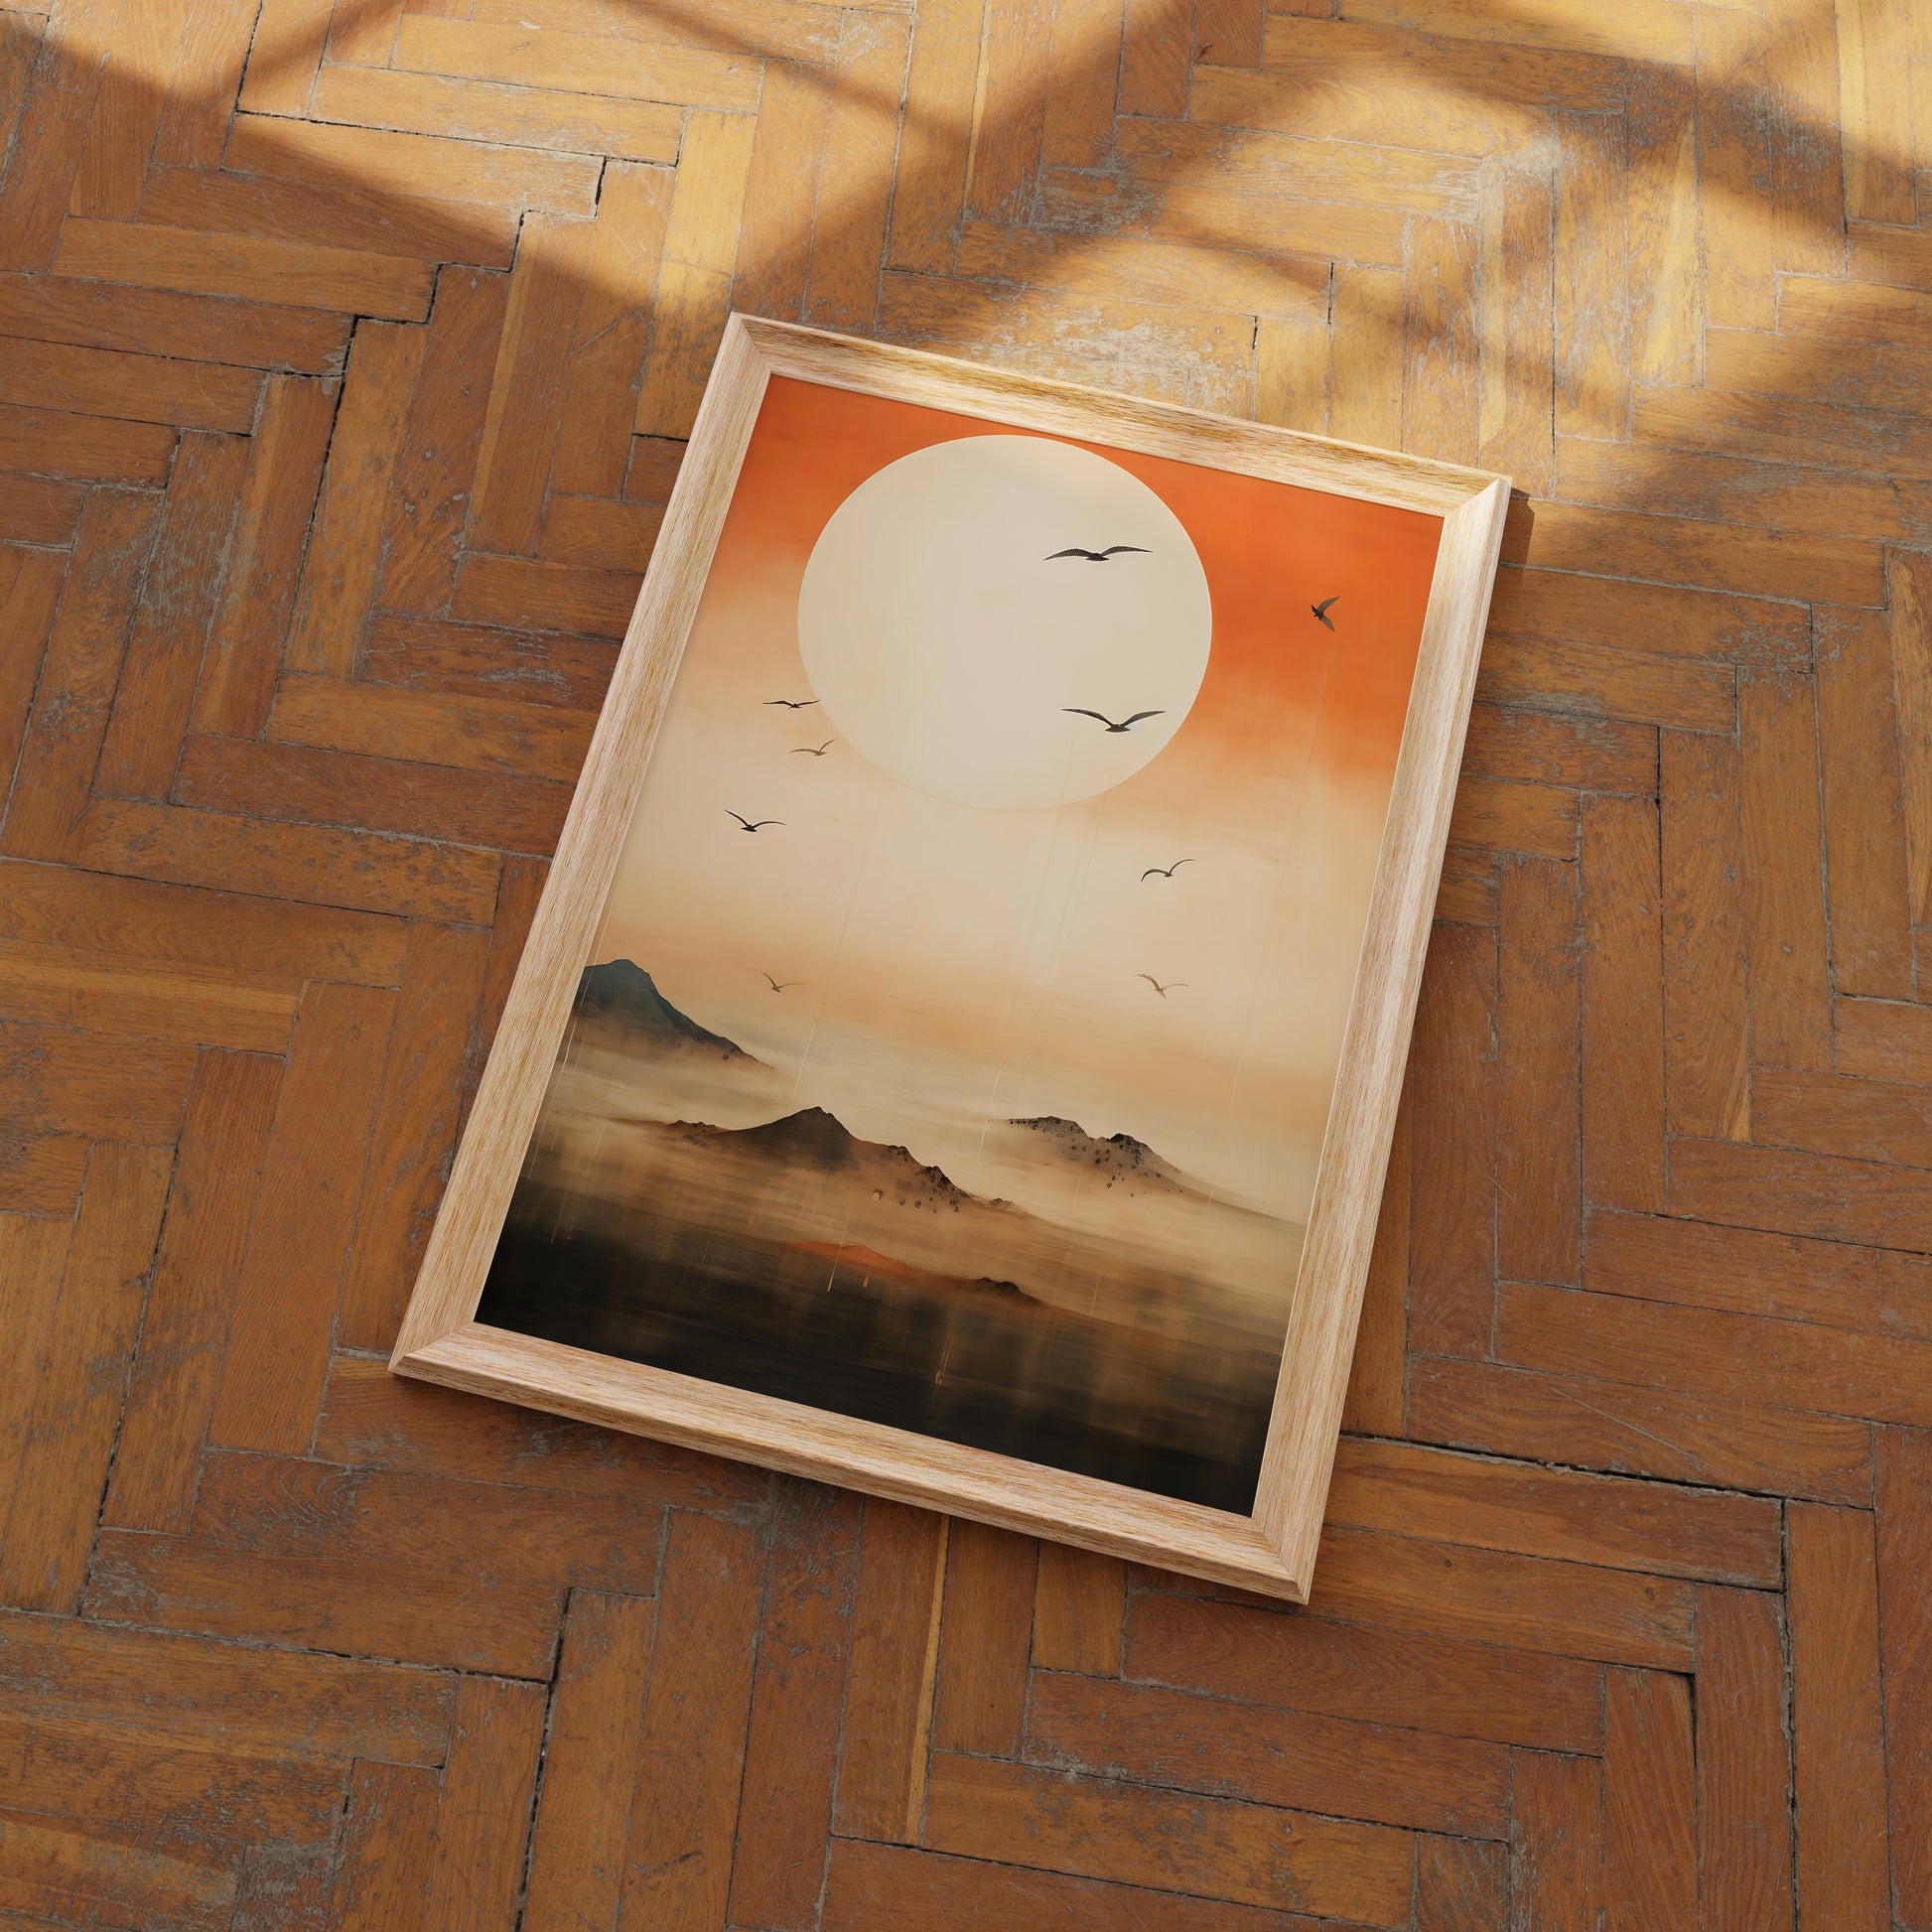 A framed painting of a sunset over mountains with birds in flight, lying on a wood parquet floor.